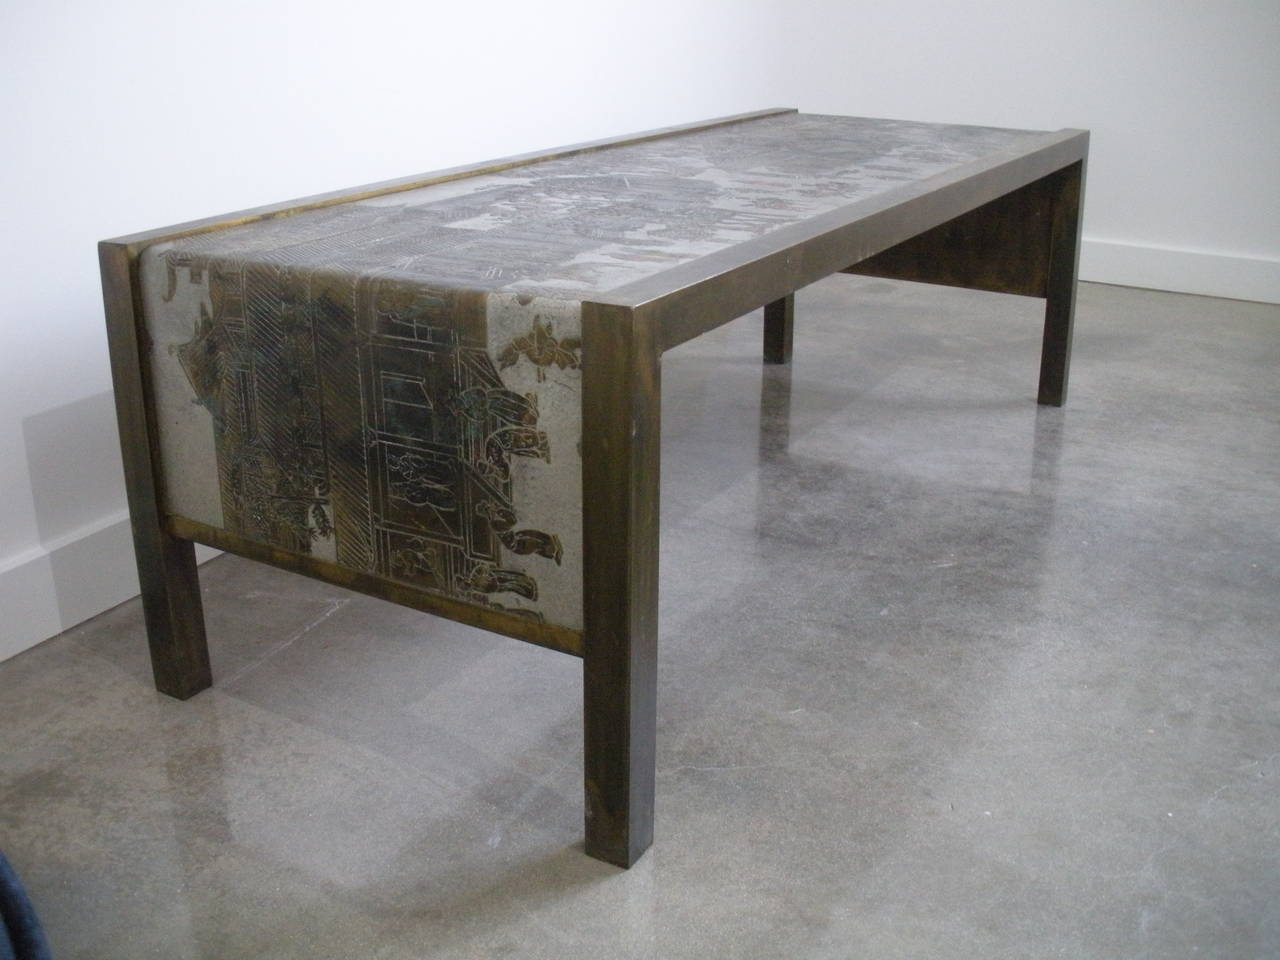 Rare bronze waterfall table in the Chan Design Spring Festival by Phillip and Kevin LaVerne.

Please feel free to contact us directly for a shipping quote, or other questions and information including making an offer by clicking 